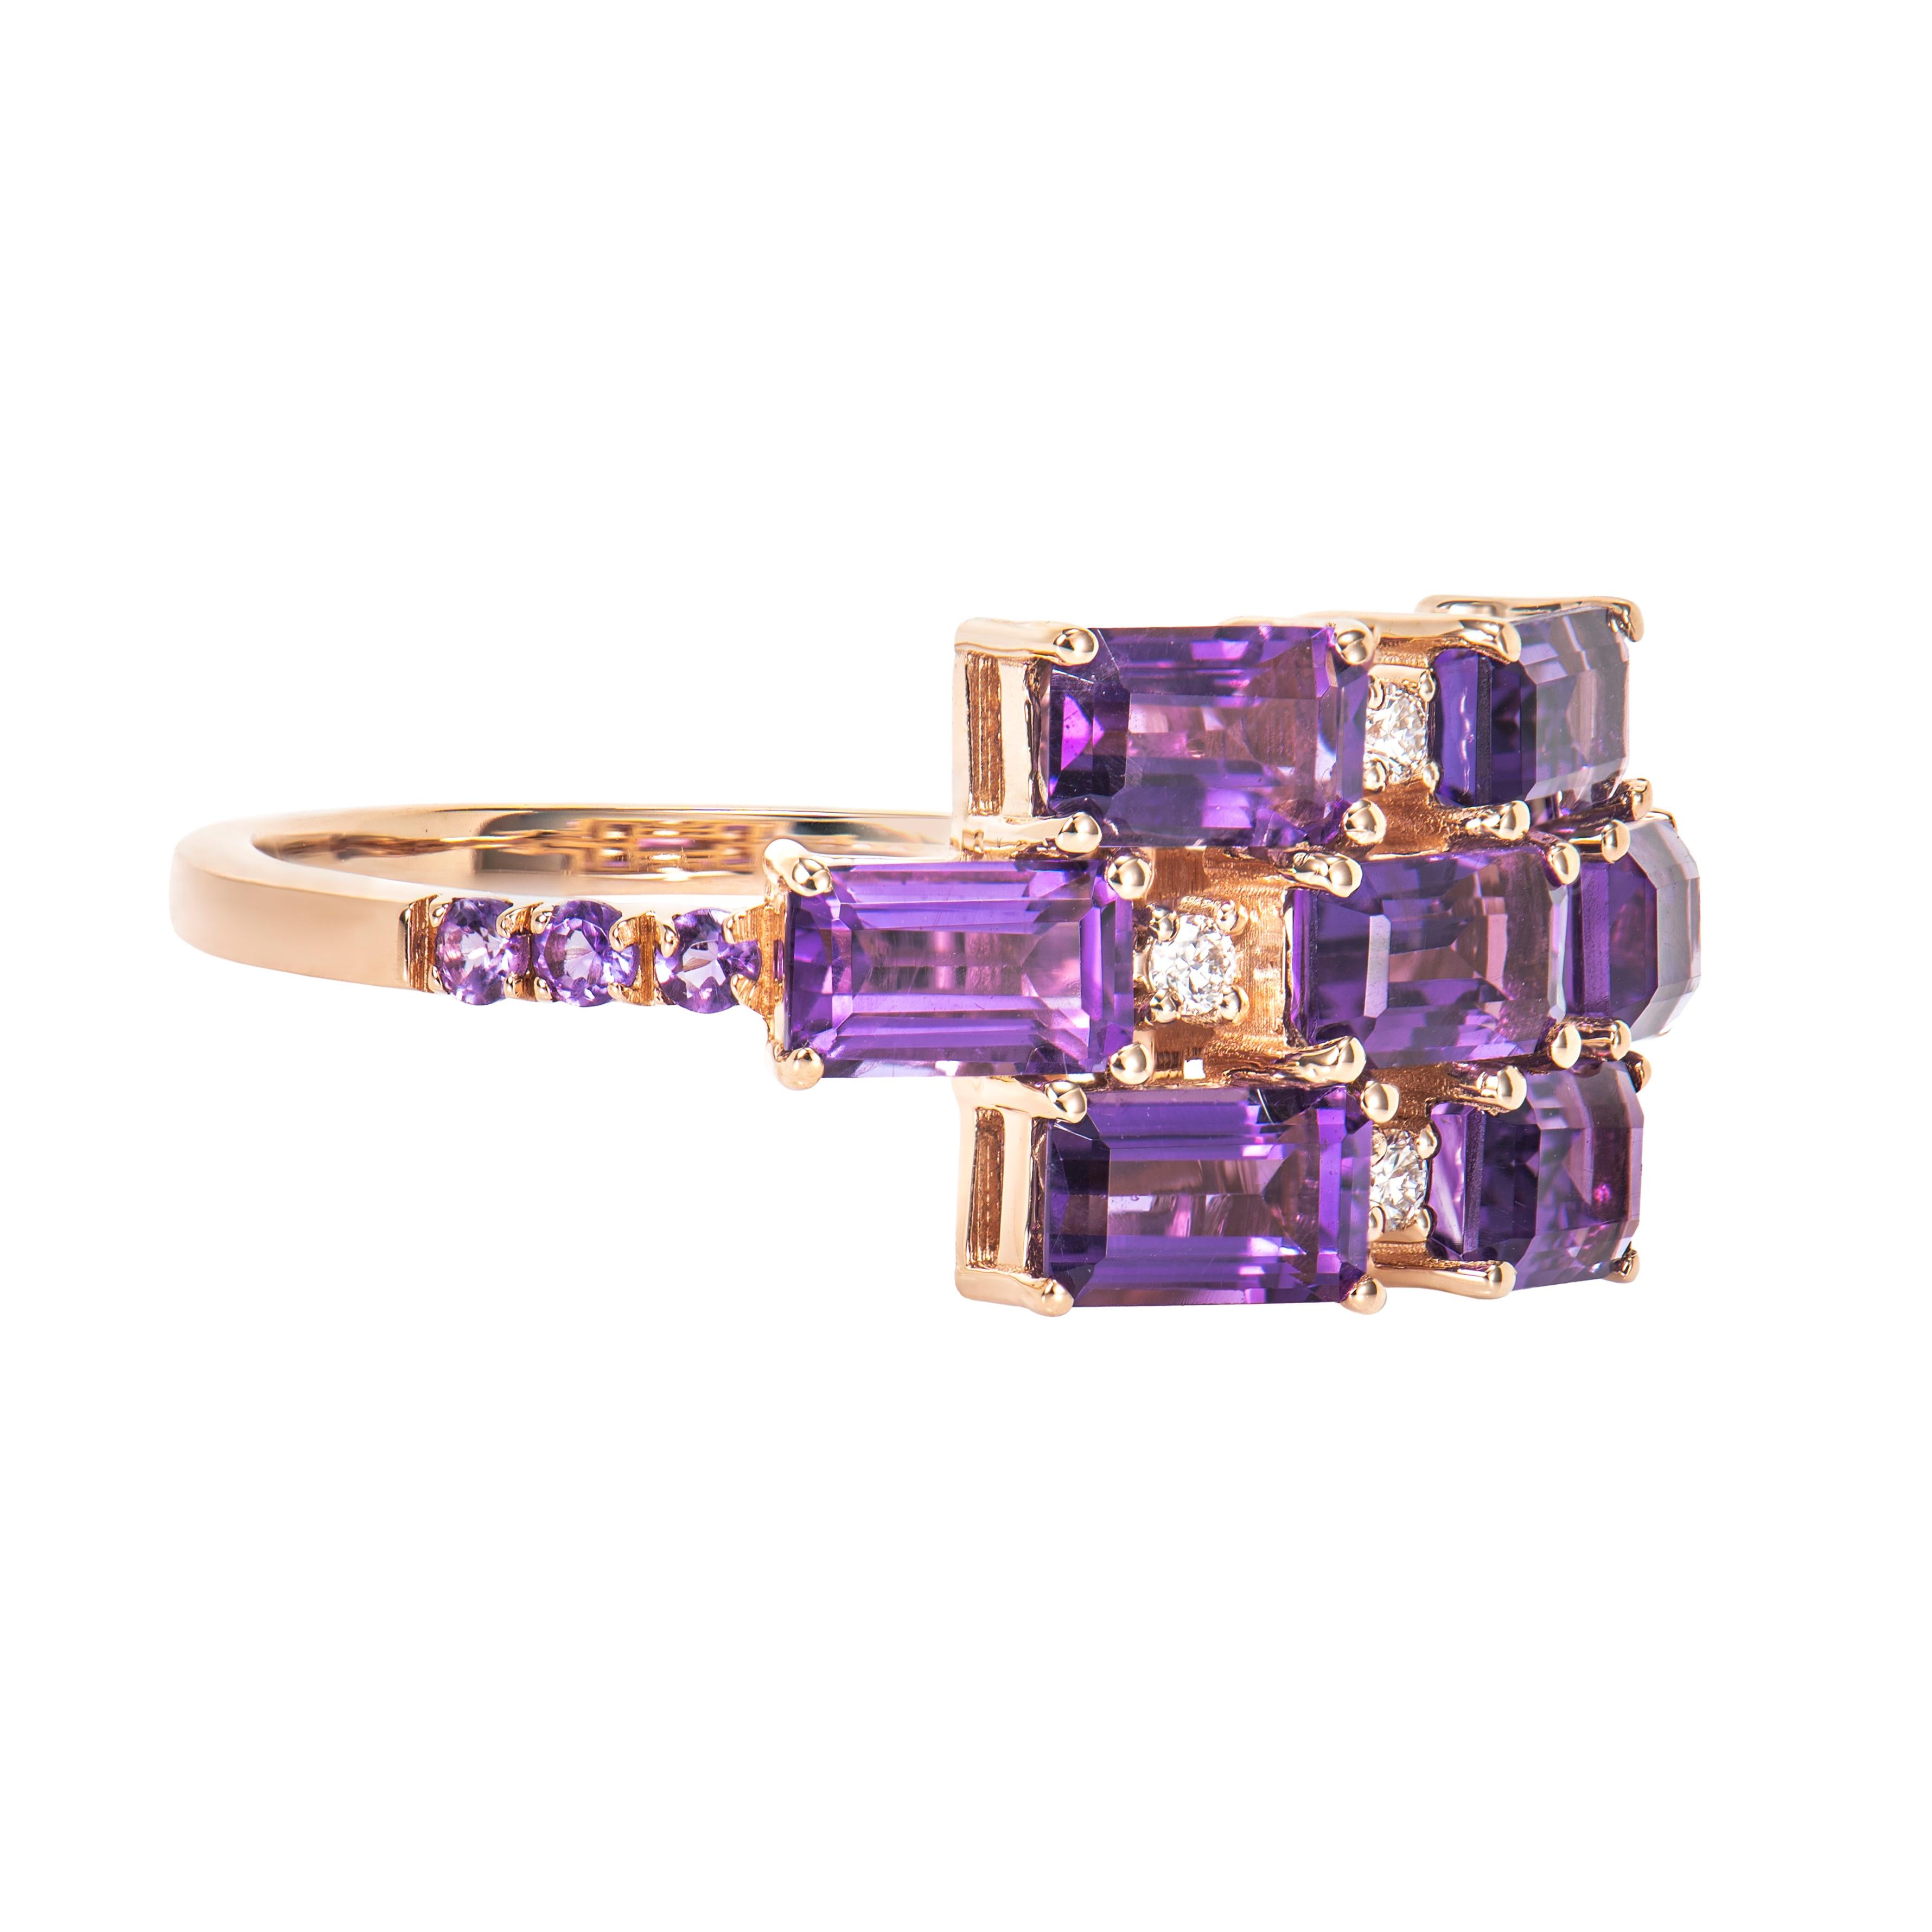 It is a fancy amethyst ring in an octagon shape. This ring made of precious stone has a timeless, exquisite appeal that can be worn on a variety of occasions. Materials such as amethyst, citrine, and rhodolite are suitable. One of these is a yellow